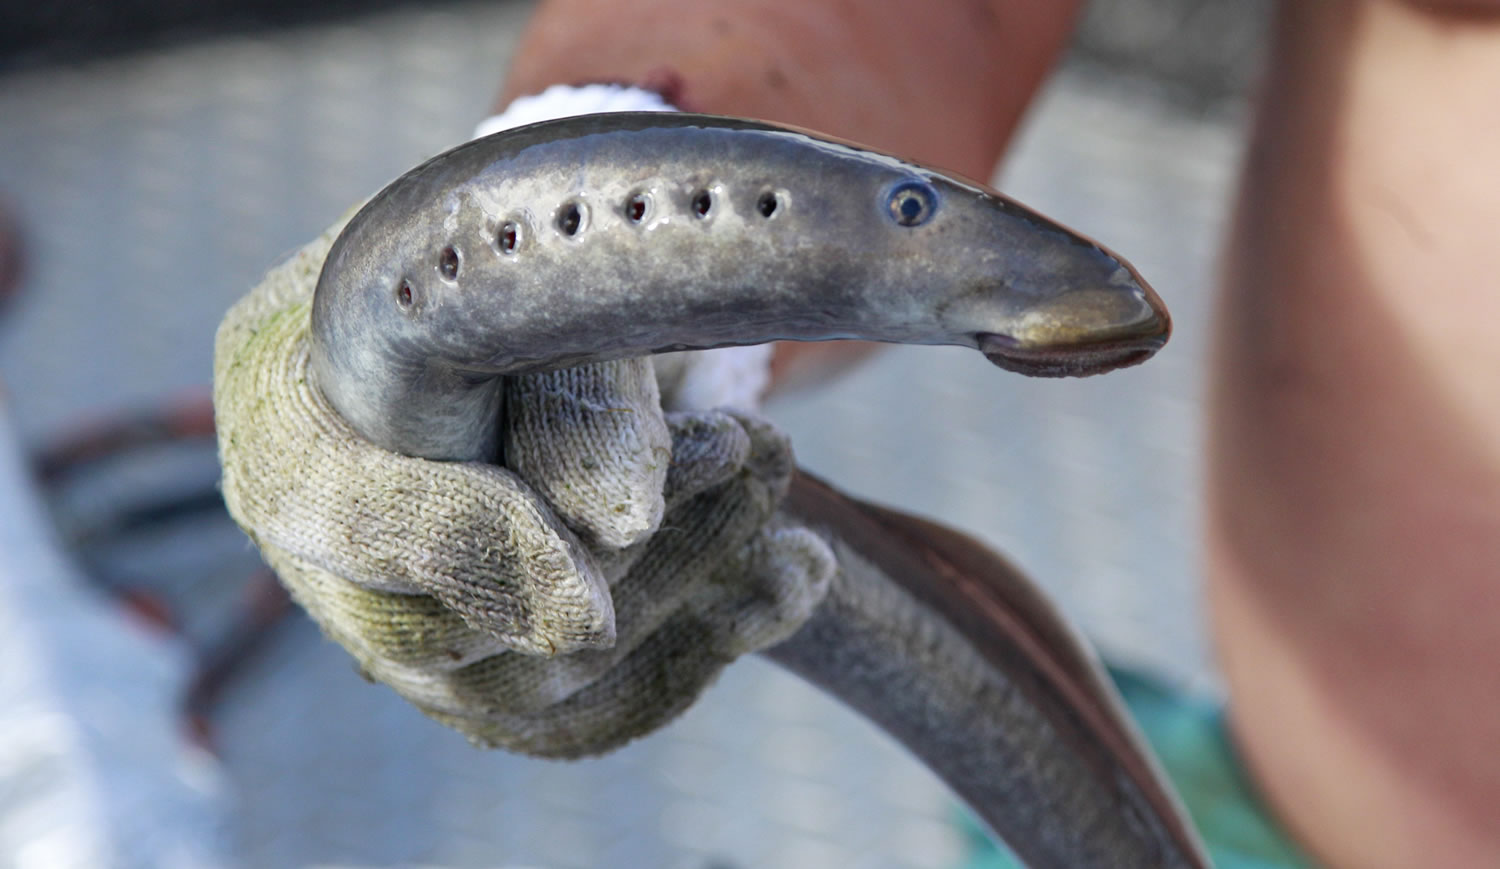 This photo taken in July 2011 shows a lamprey at Willamette Falls in Oregon City, Ore. As long as Indians have lived in the Northwest, they have looked to lamprey for food. But in the decades since dozens of hydroelectric dams have harnessed the power of the Columbia, Willamette and Snake rivers to make electricity, this jawless fish popularly known as an eel has steadily declined until Columbia Basin tribes have just a few places left to go for lamprey.